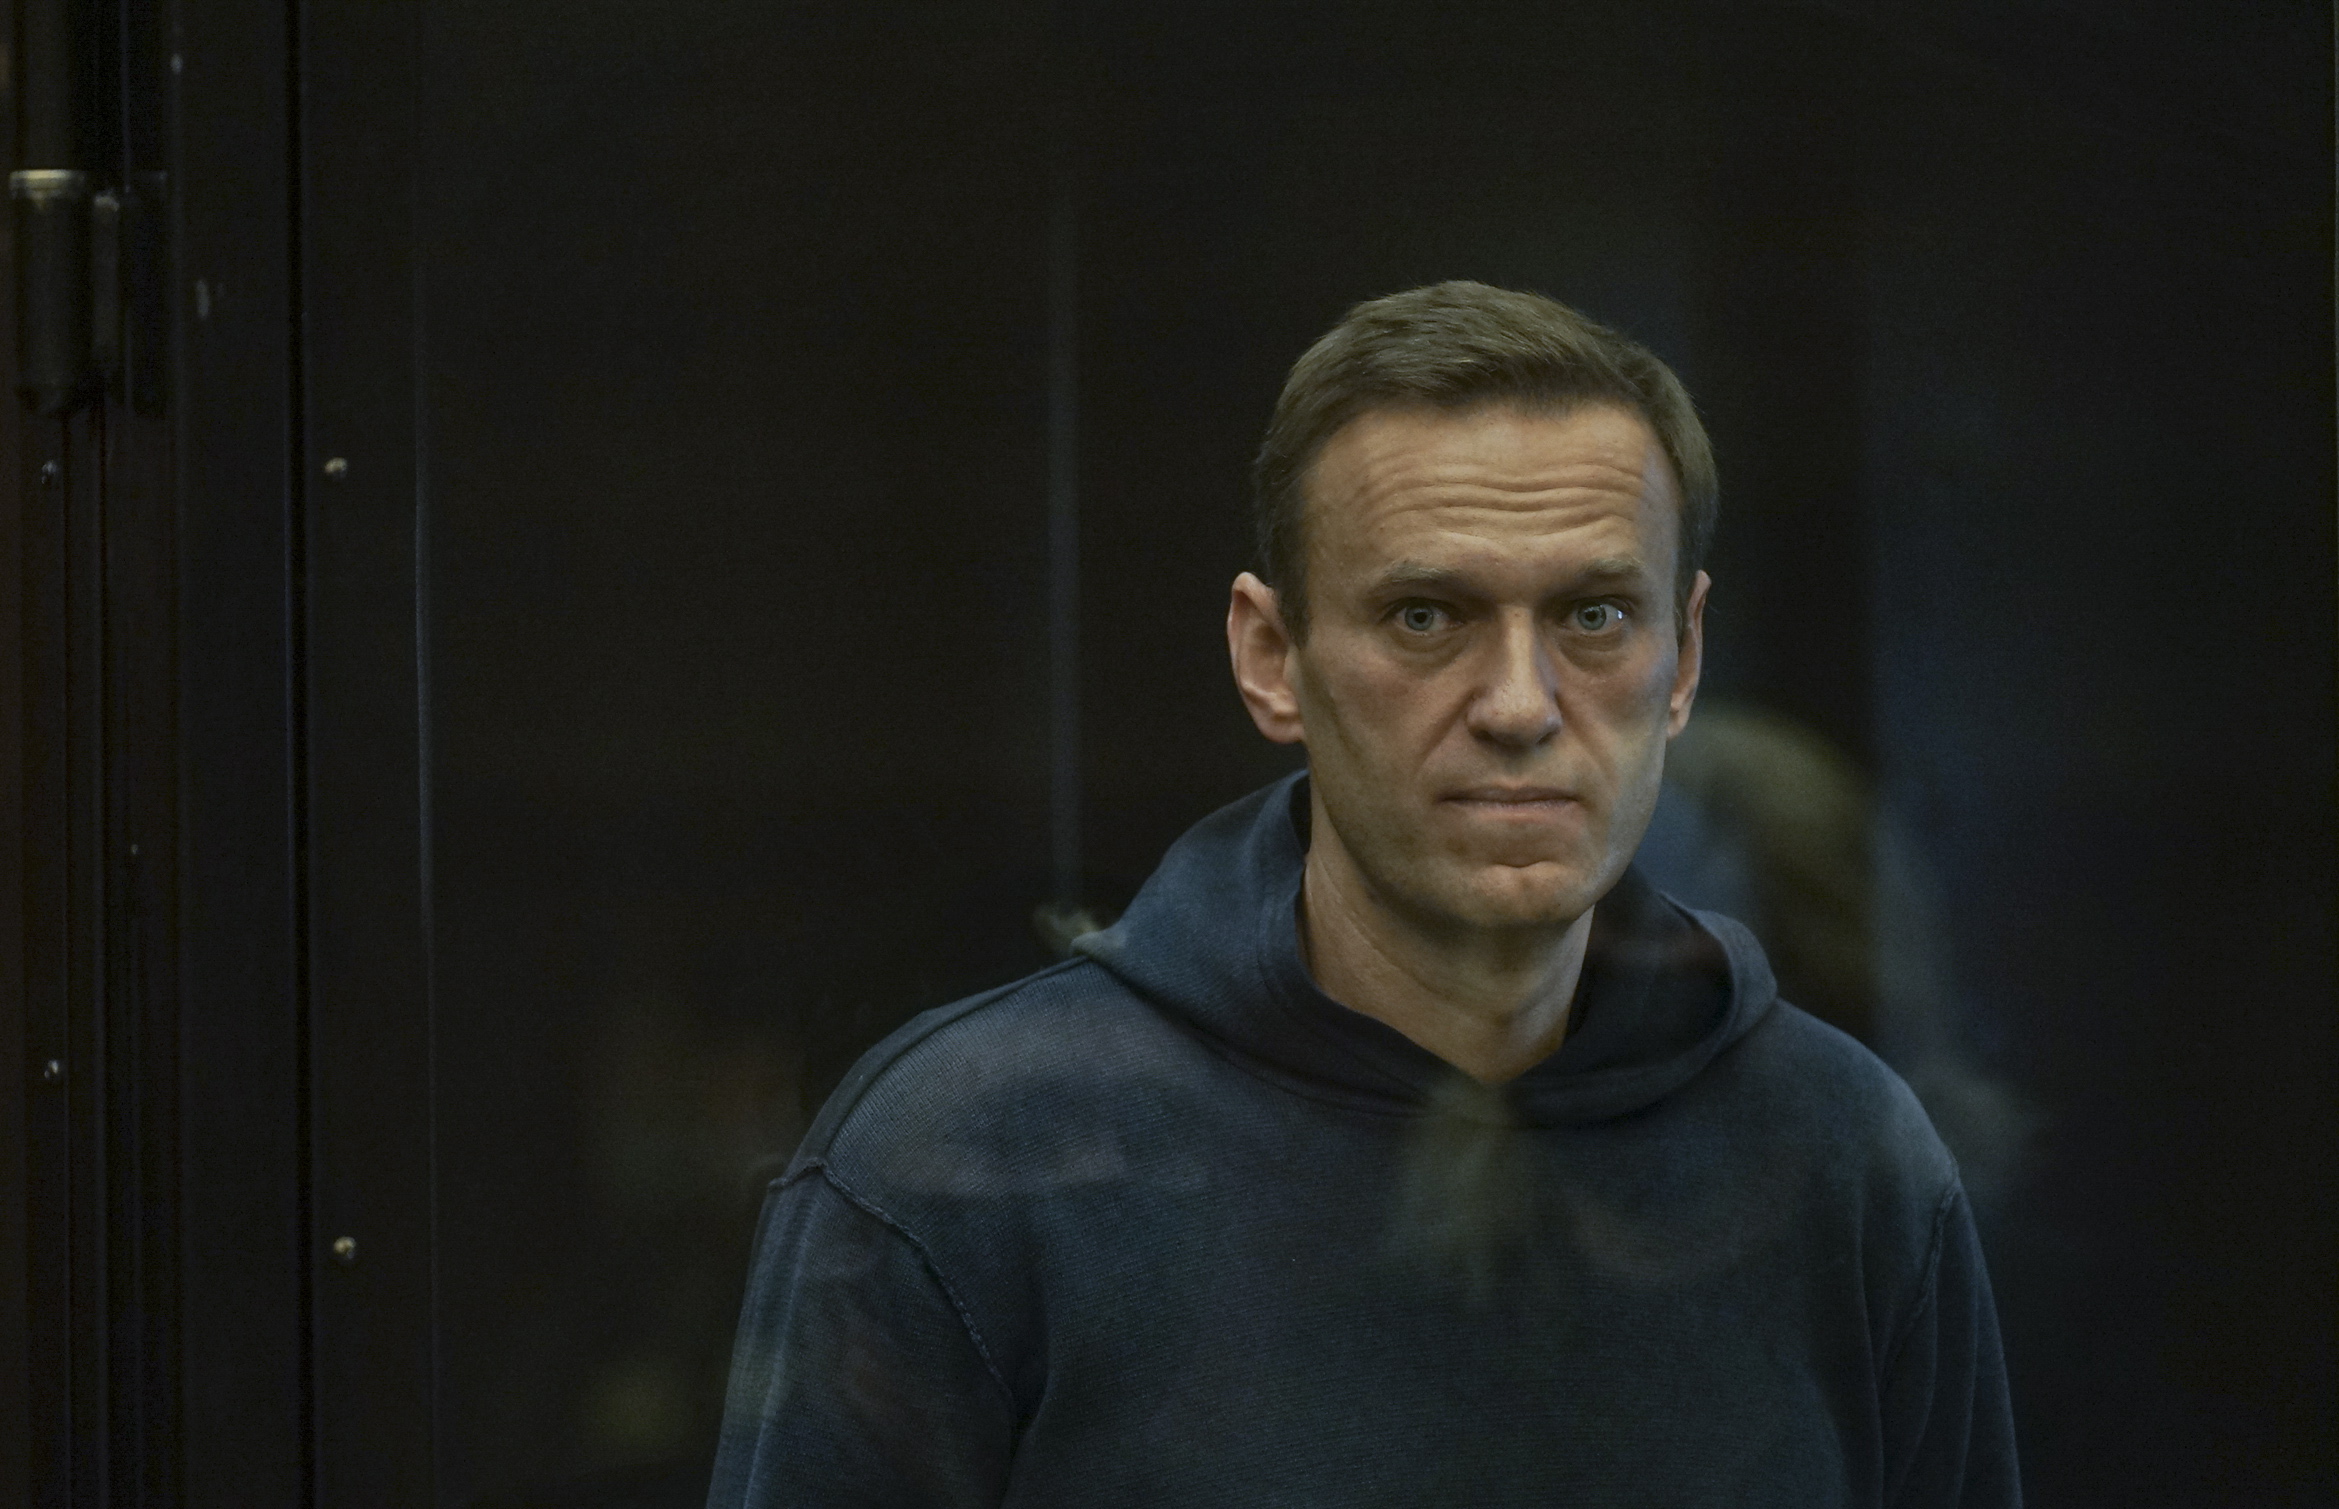 epa08980966 A handout photo made available by Moscow's Citiy Court Press Service shows Russian opposition leader Alexei Navalny (L) standing in the glass cage during a hearing in the Moscow City Court in Moscow, Russia, 02 February 2021. The Moscow City Court will consider on 02 February 2021 the requirement of the Federal Penitentiary Service to replace Alexei Navalny's suspended sentence with a real one. Opposition leader Alexei Navalny was detained after his arrival to Moscow from Germany on 17 January 2021. A Moscow judge on 18 January ruled that he will remain in custody for 30 days following his airport arrest.  EPA/MOSCOW CITY COURT PRESS SERVICE HANDOUT MANDATORY CREDIT HANDOUT EDITORIAL USE ONLY/NO SALES  EPA-EFE/MOSCOW CITY COURT PRESS SERVICE HANDOUT MANDATORY CREDIT HANDOUT EDITORIAL USE ONLY/NO SALES